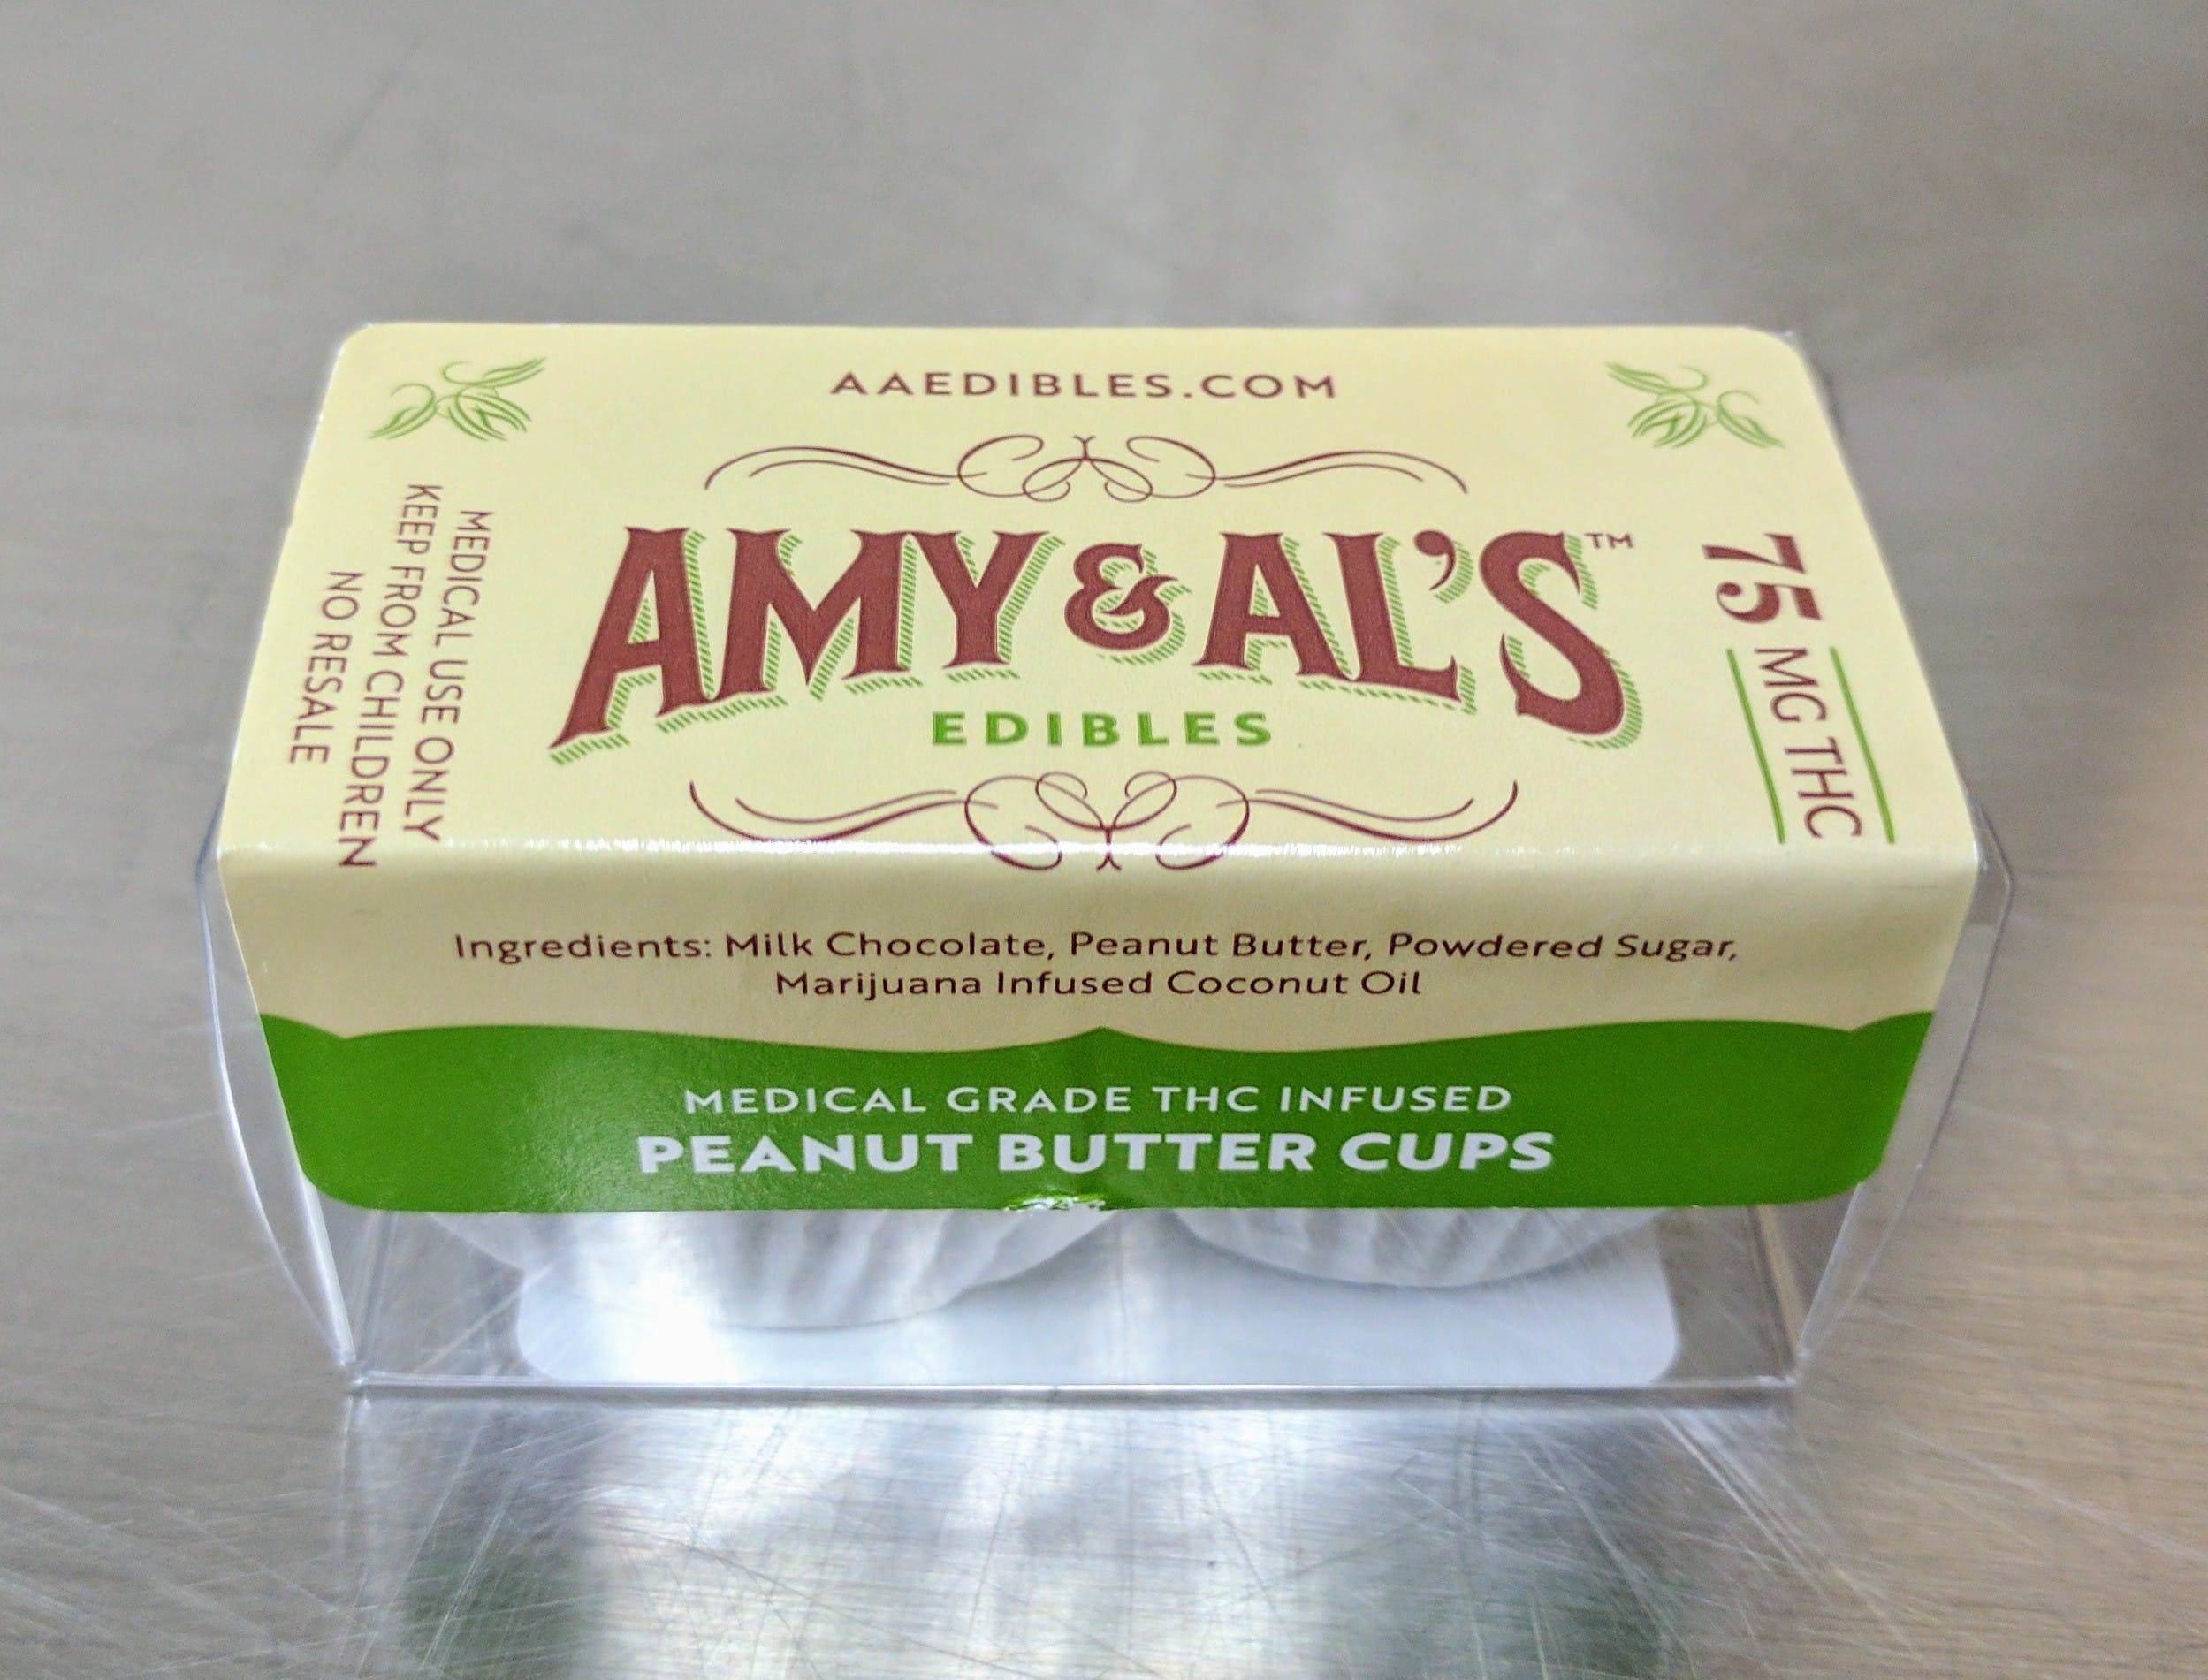 marijuana-dispensaries-the-mint-dispensary-in-guadalupe-amy-a-als-peanut-butter-cups-75mg